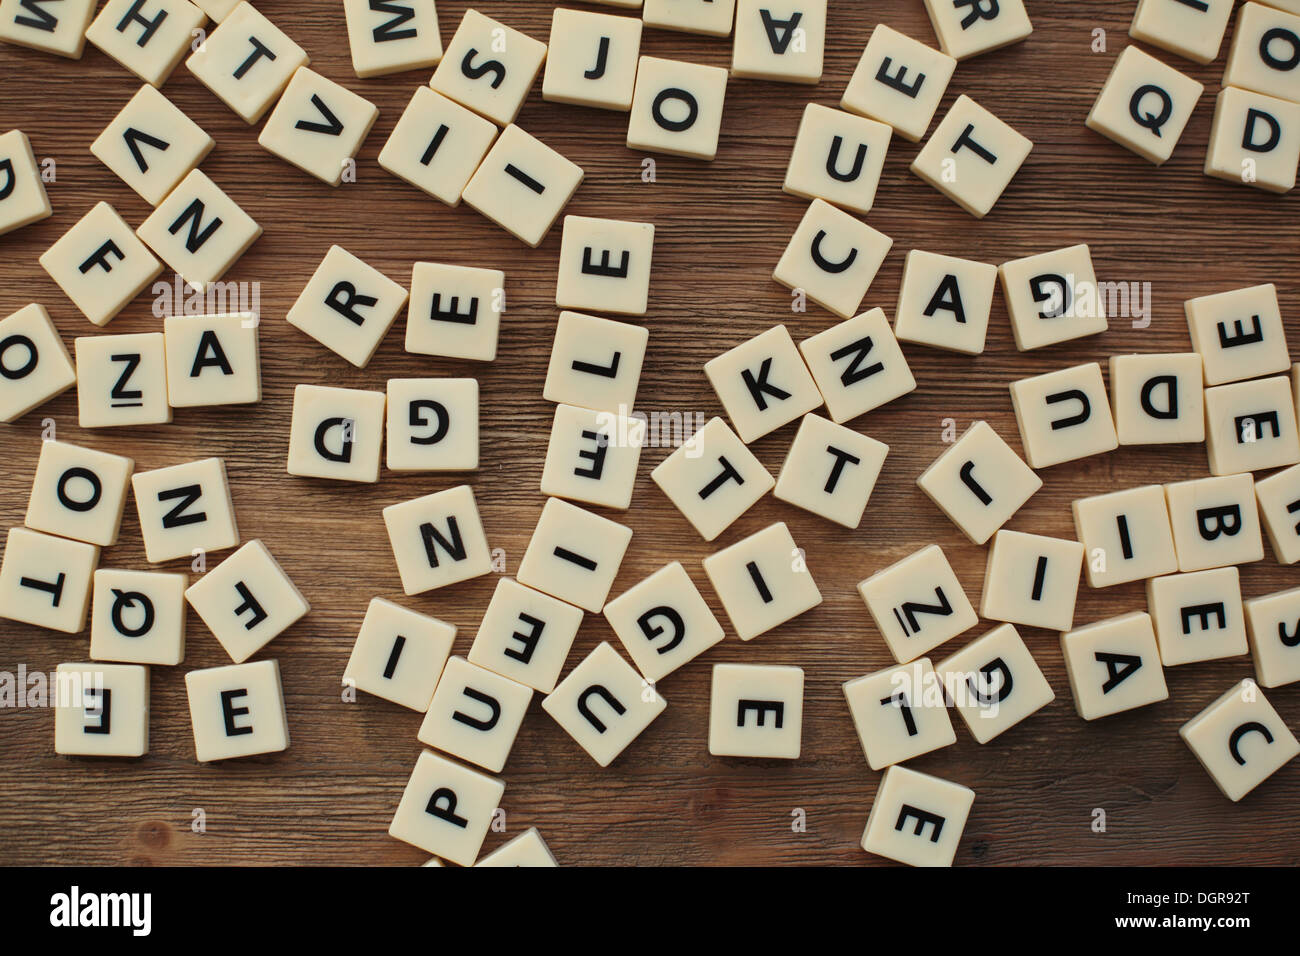 Plastic letters from a children's spelling game, jumbled on a wooden table Stock Photo